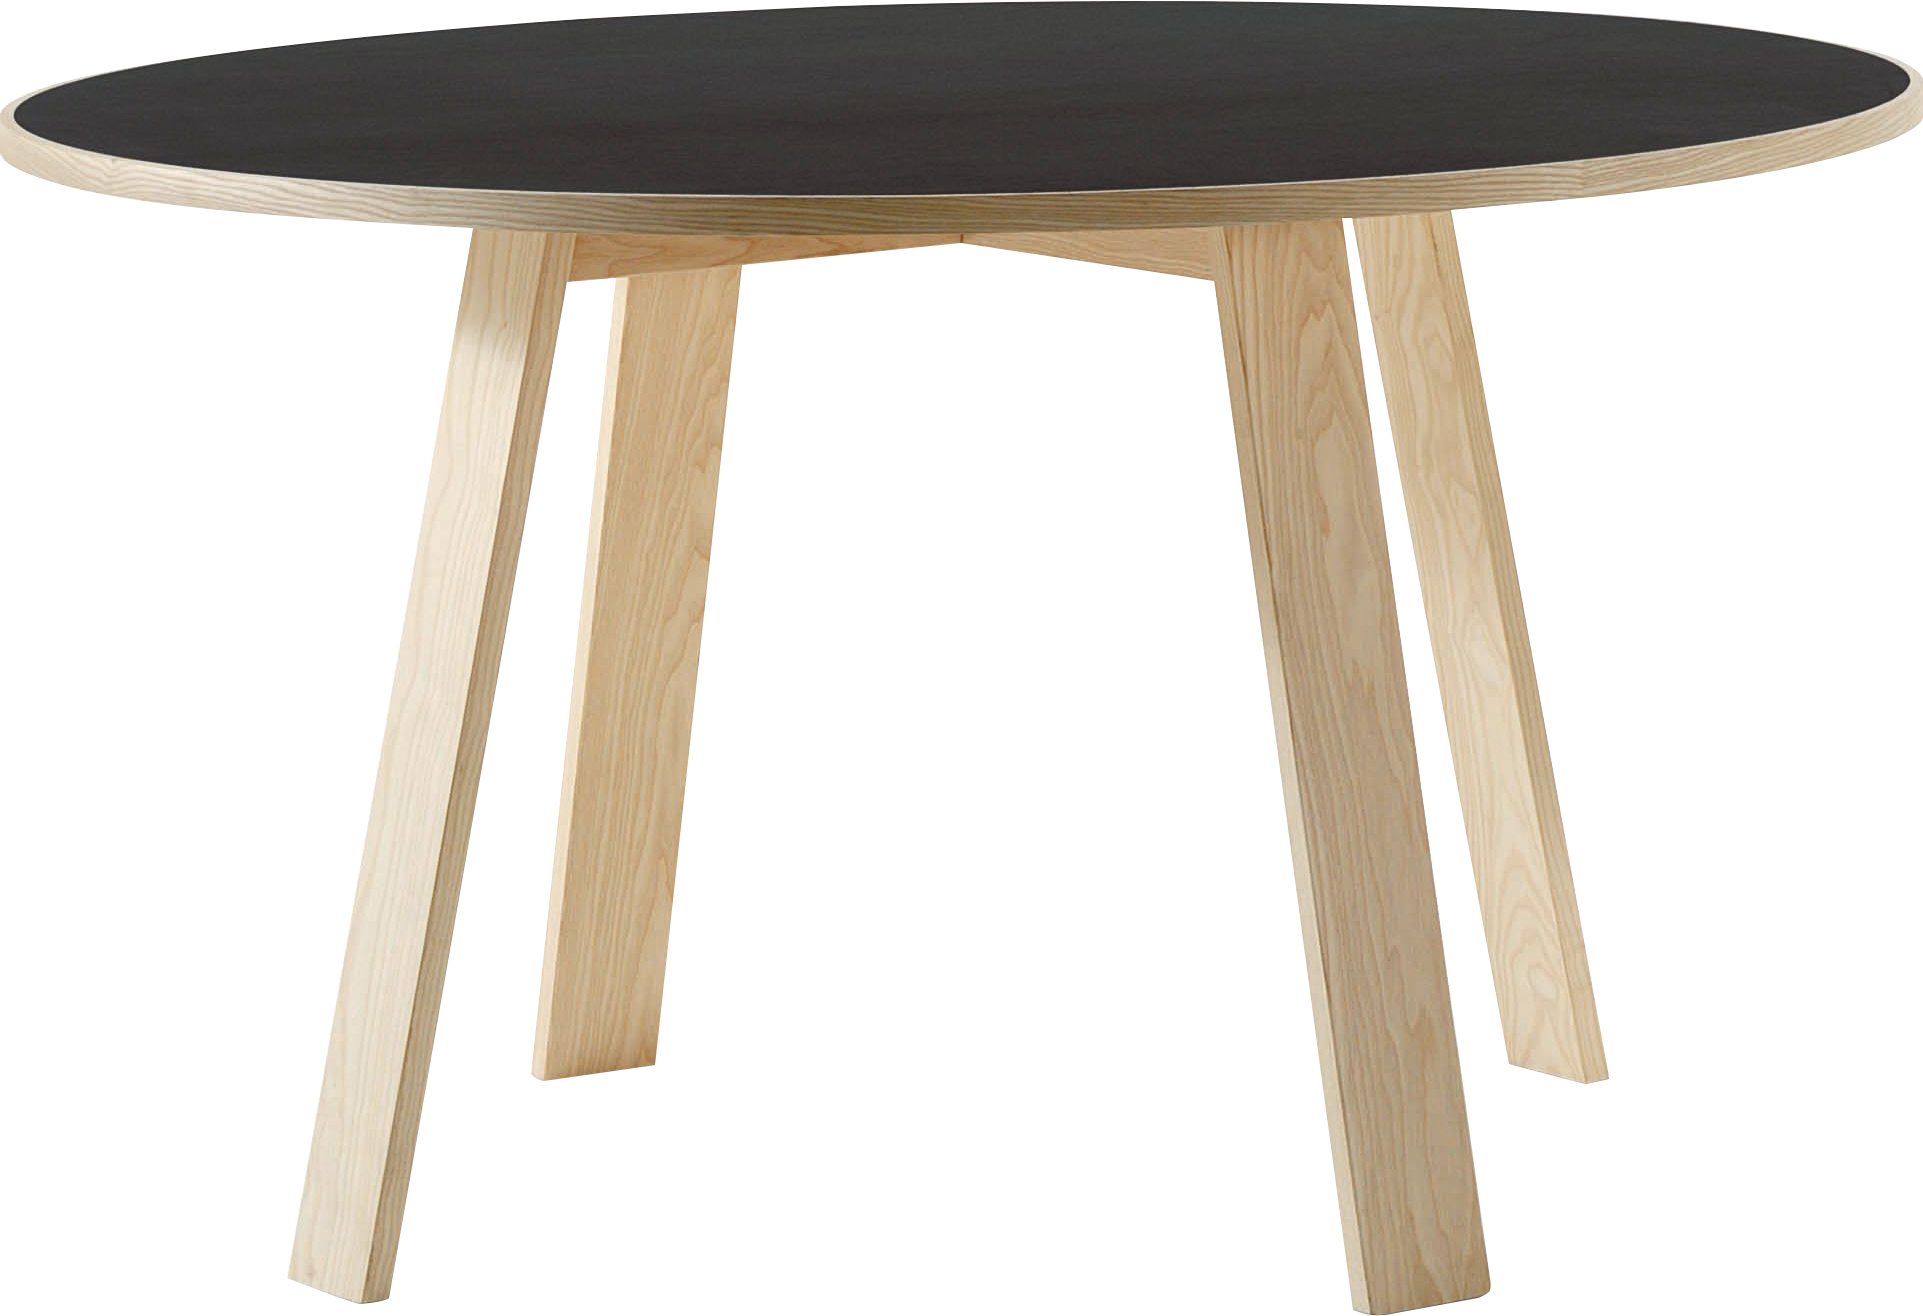 Table Png Image Transparent Image Download, Size: 1923x1316px Regarding Transparent Side Tables For Living Rooms (Gallery 8 of 20)